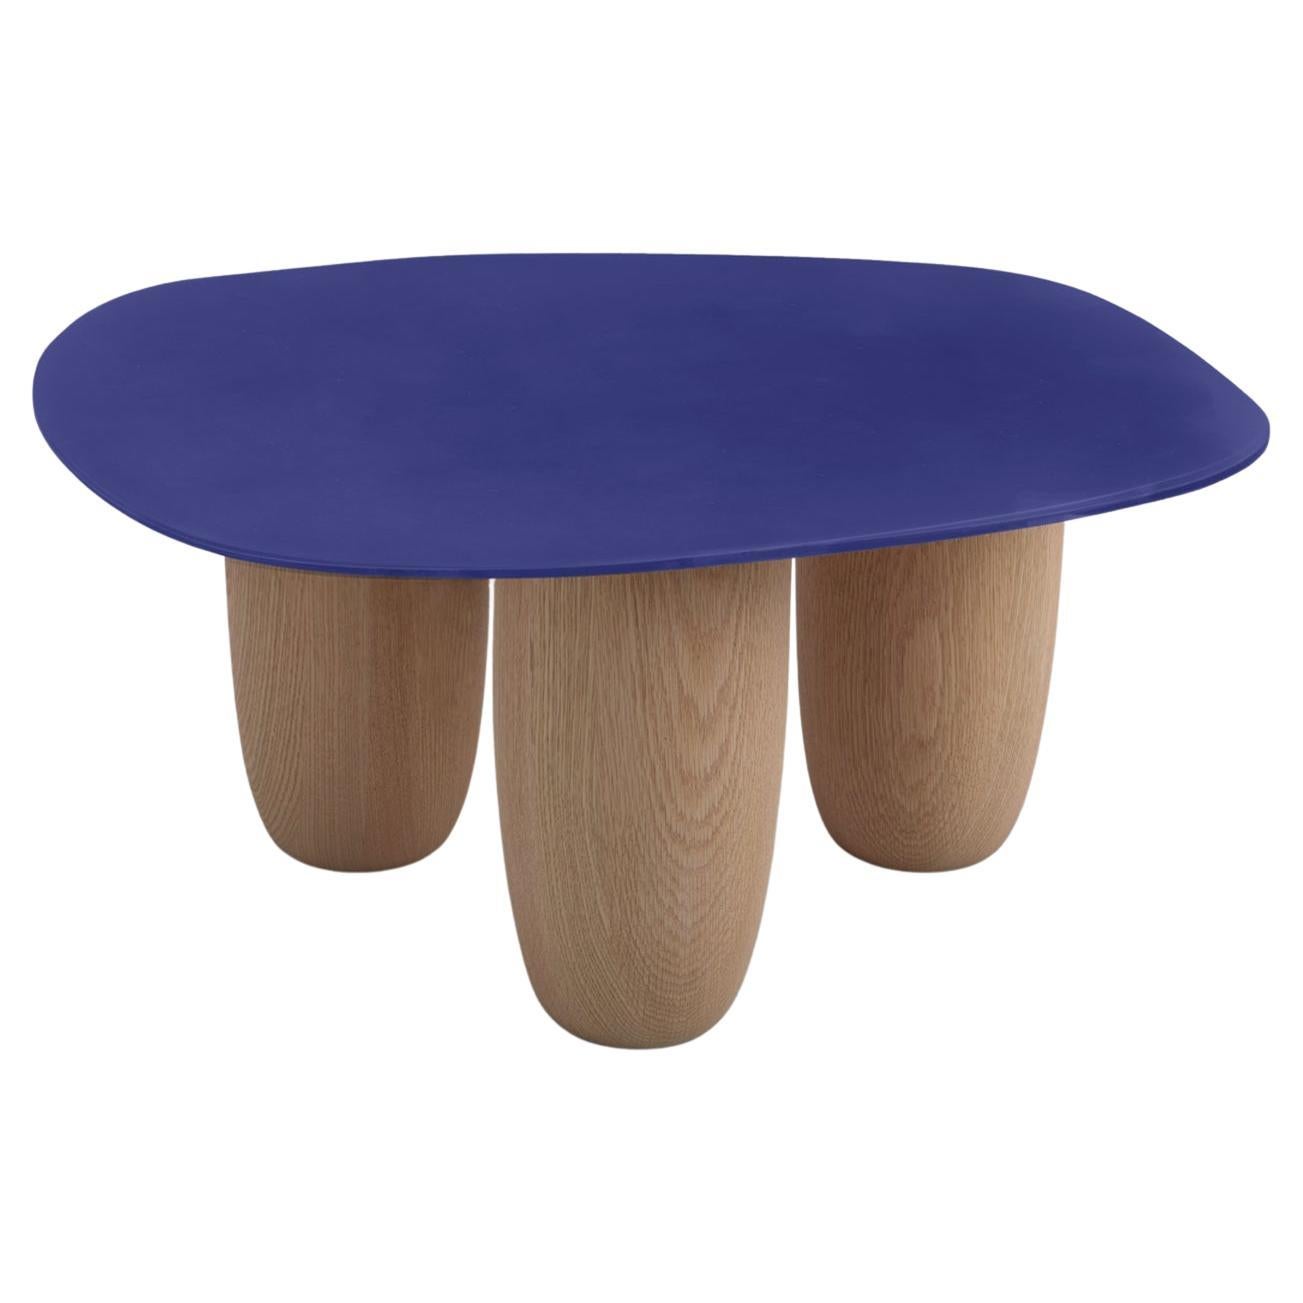 Contemporary Low Table Blue Steel and Natural Oak Legs by Vivian Carbonell